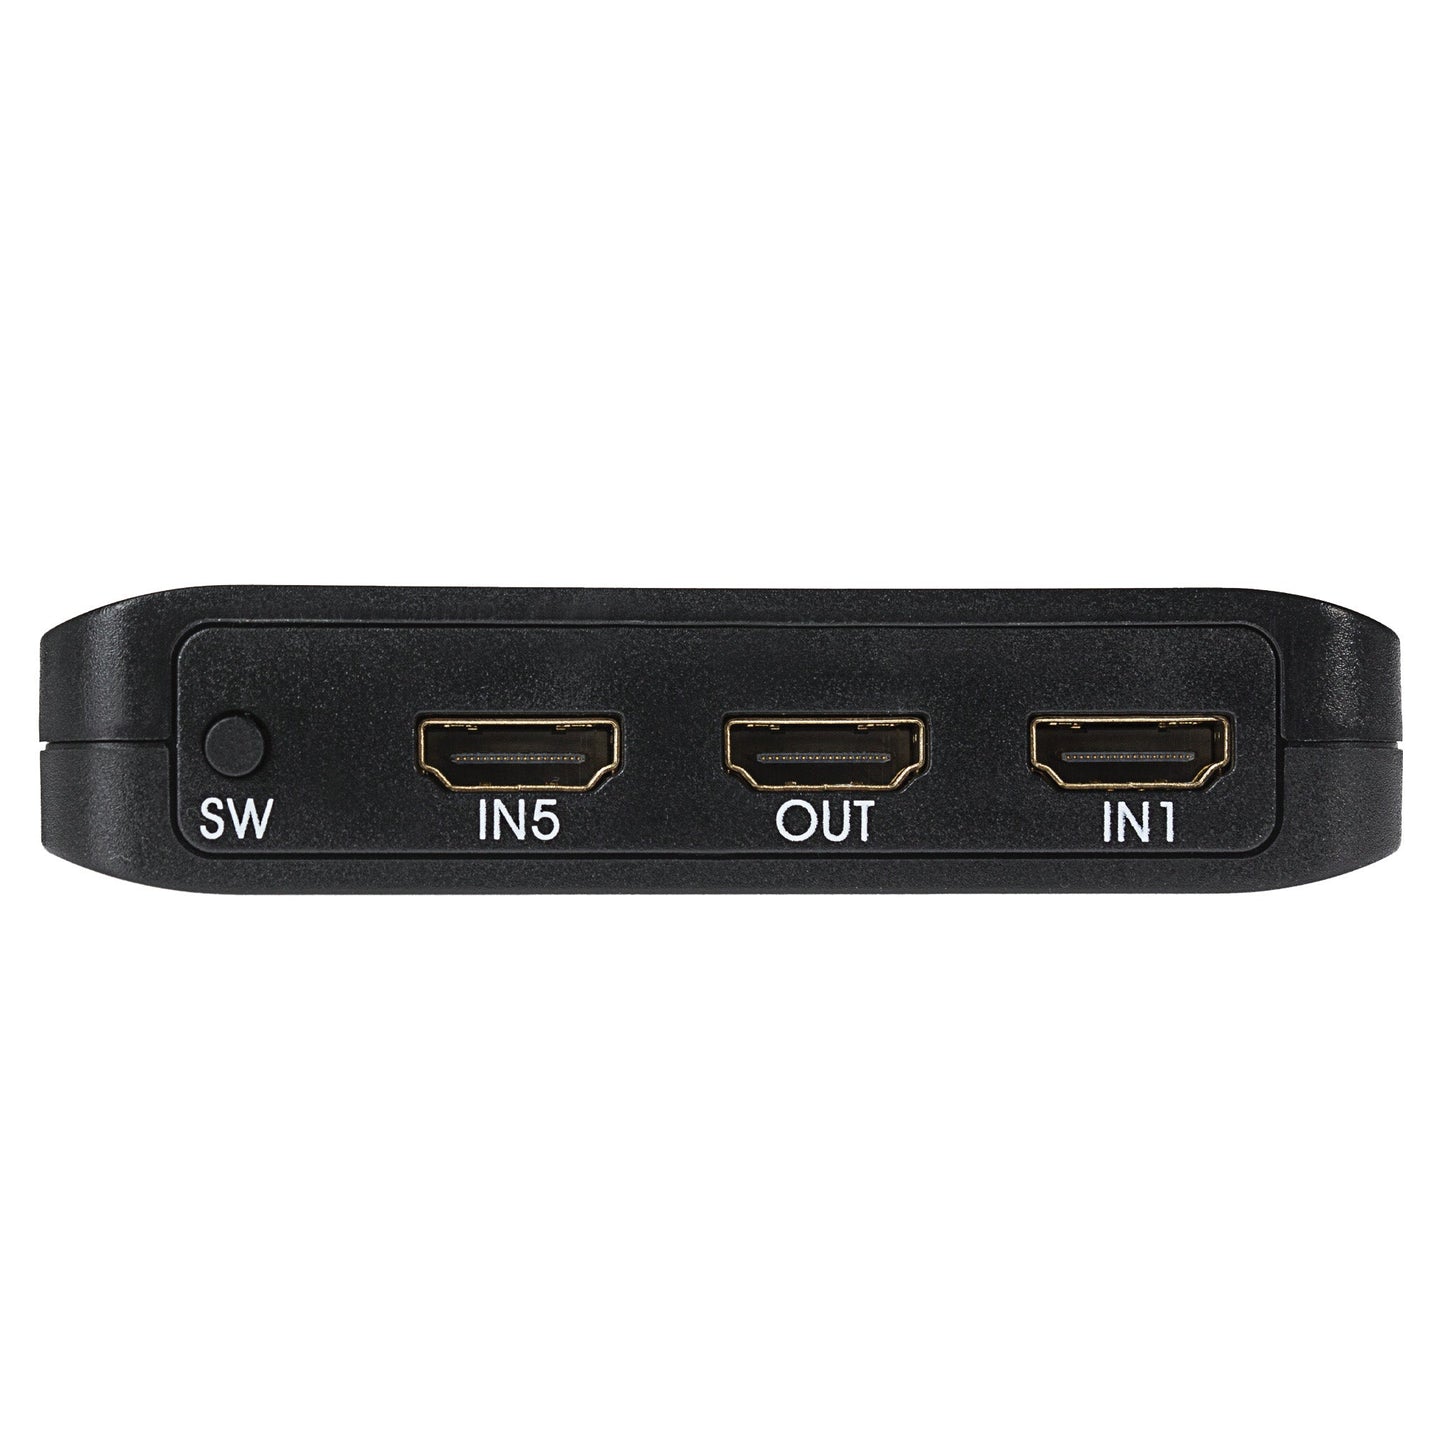 MPS HDMI Switch 5 Ports In 1 Port Out 4K Ultra HD @60Hz with Remote Control - Black - maplin.co.uk